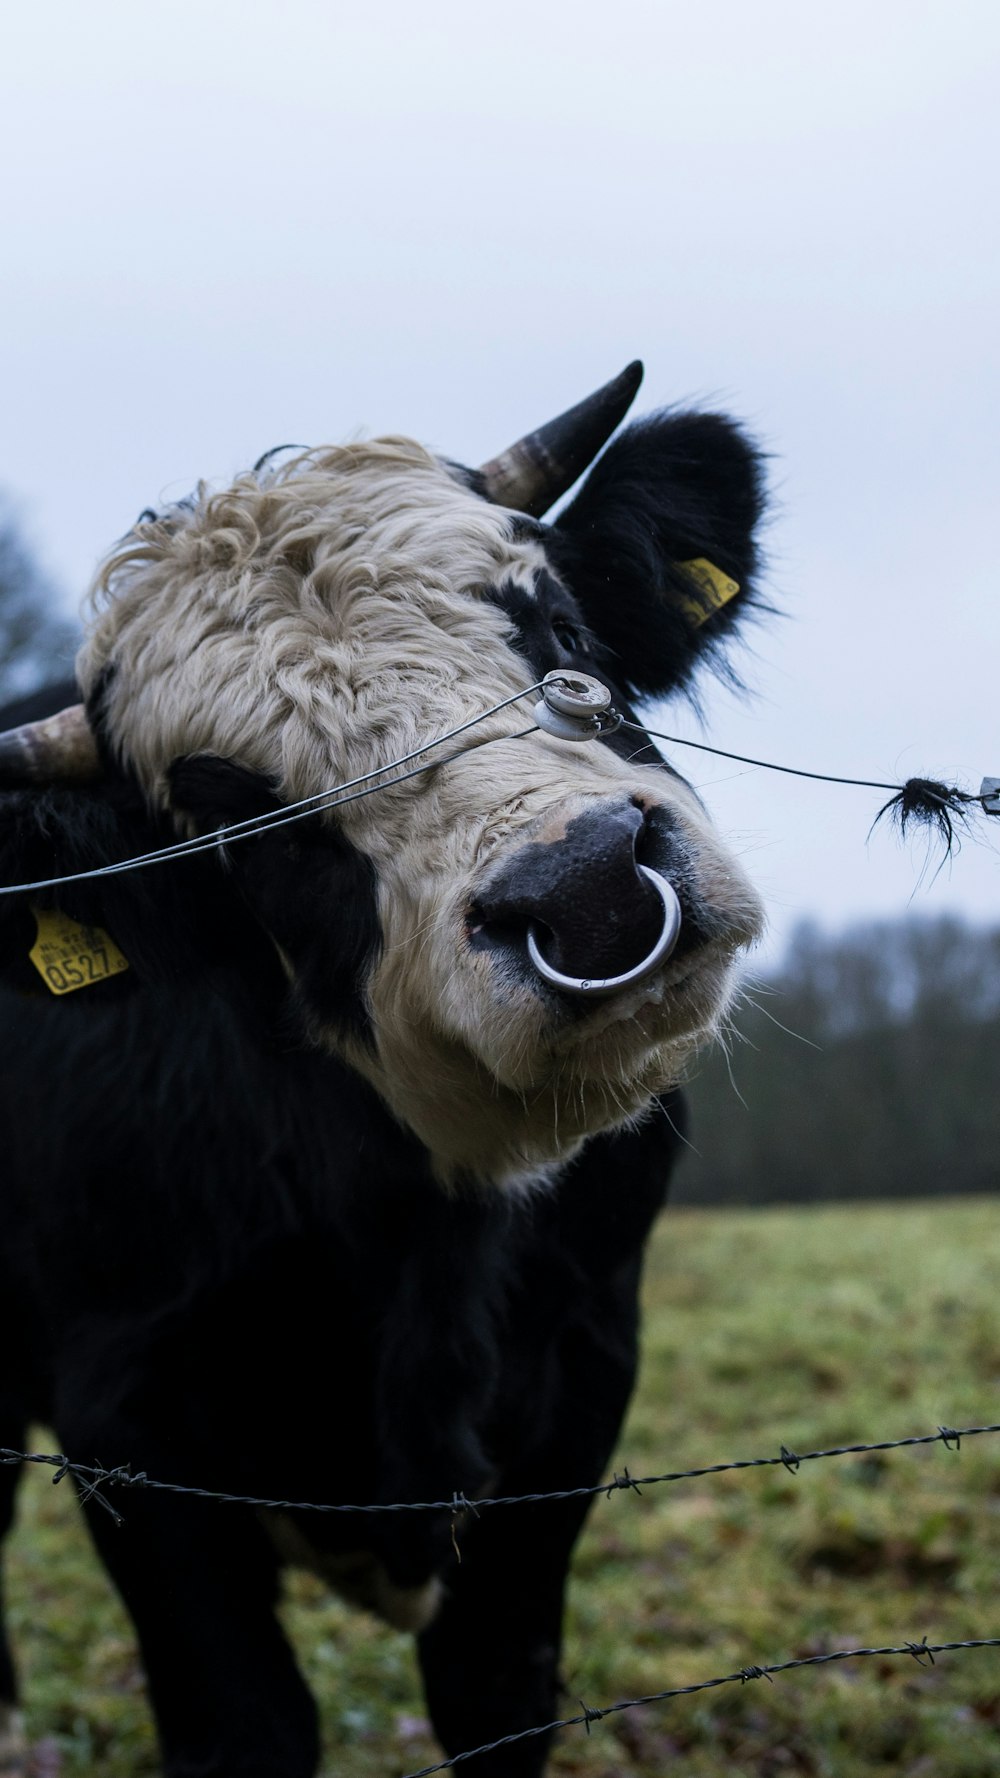 a cow with a yellow tag on its ear